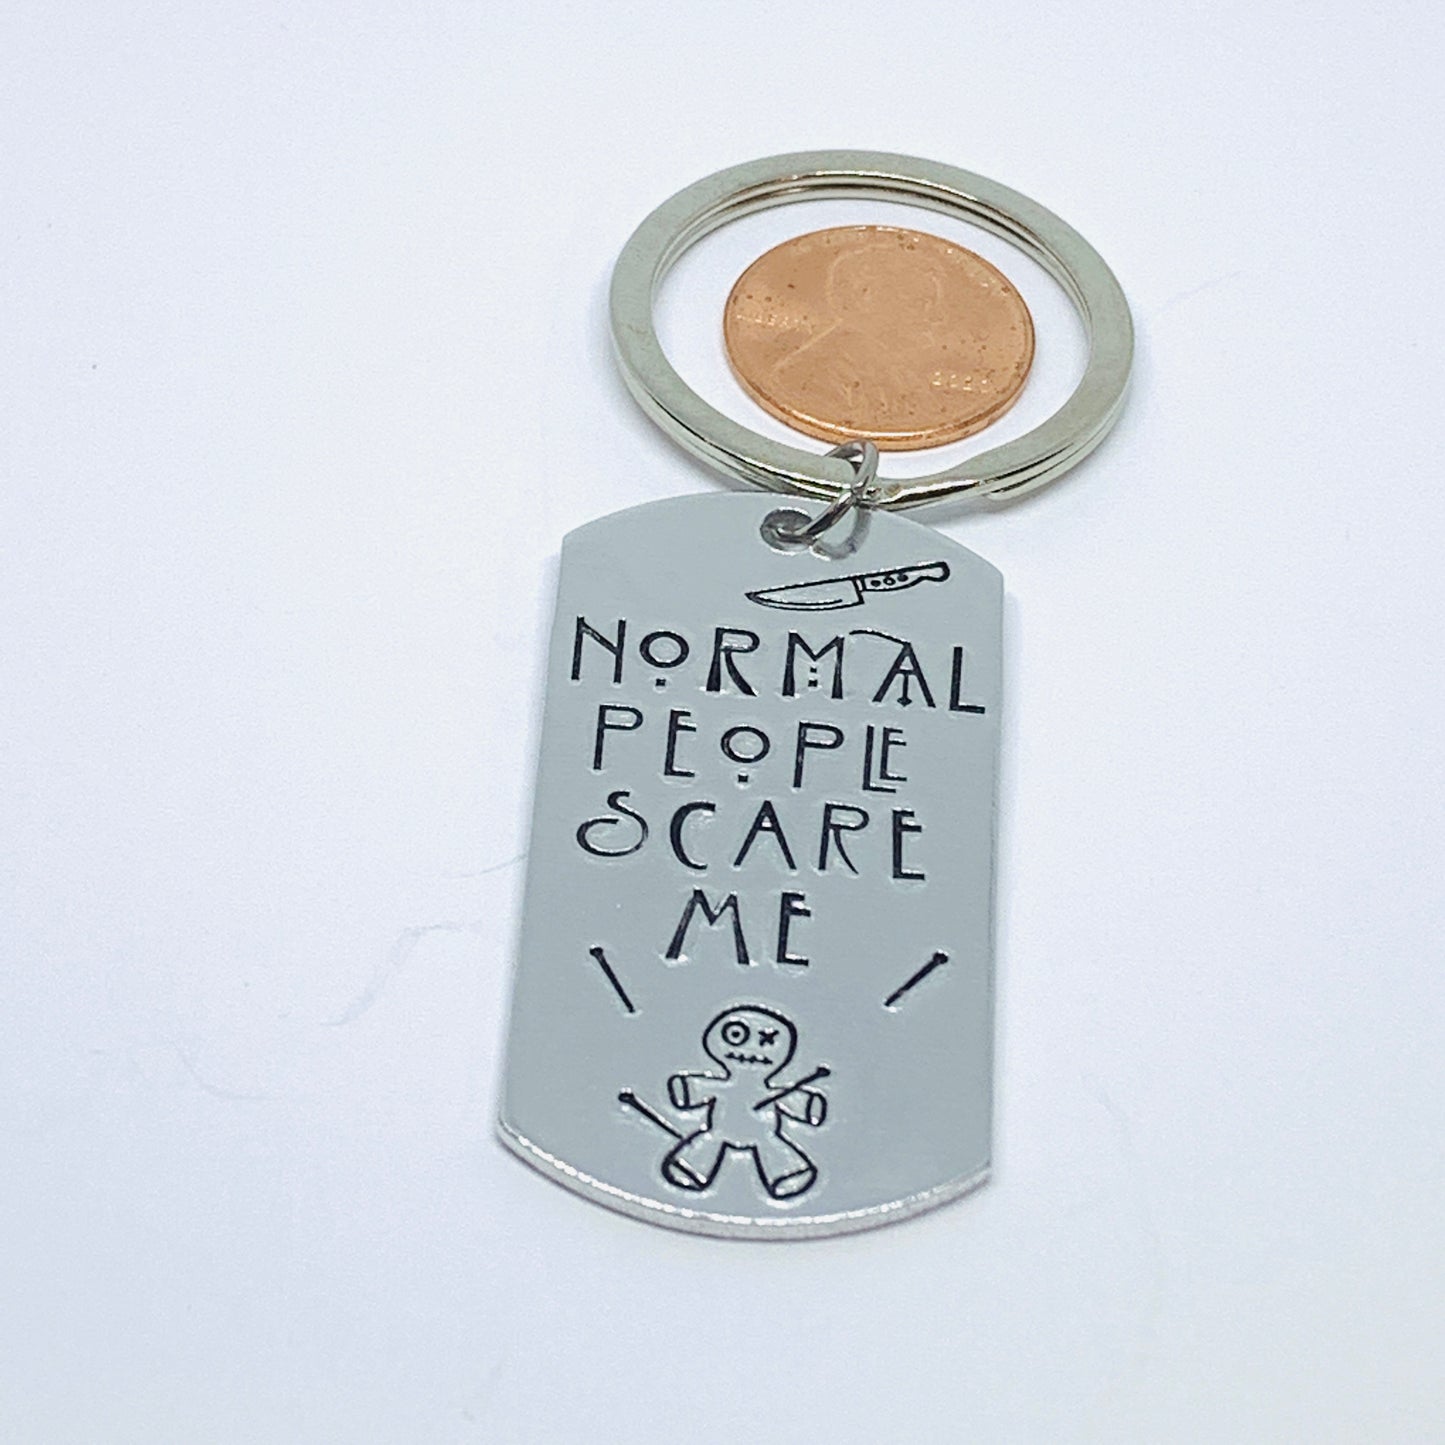 Normal people scare me  - Hand Stamped Key Ring